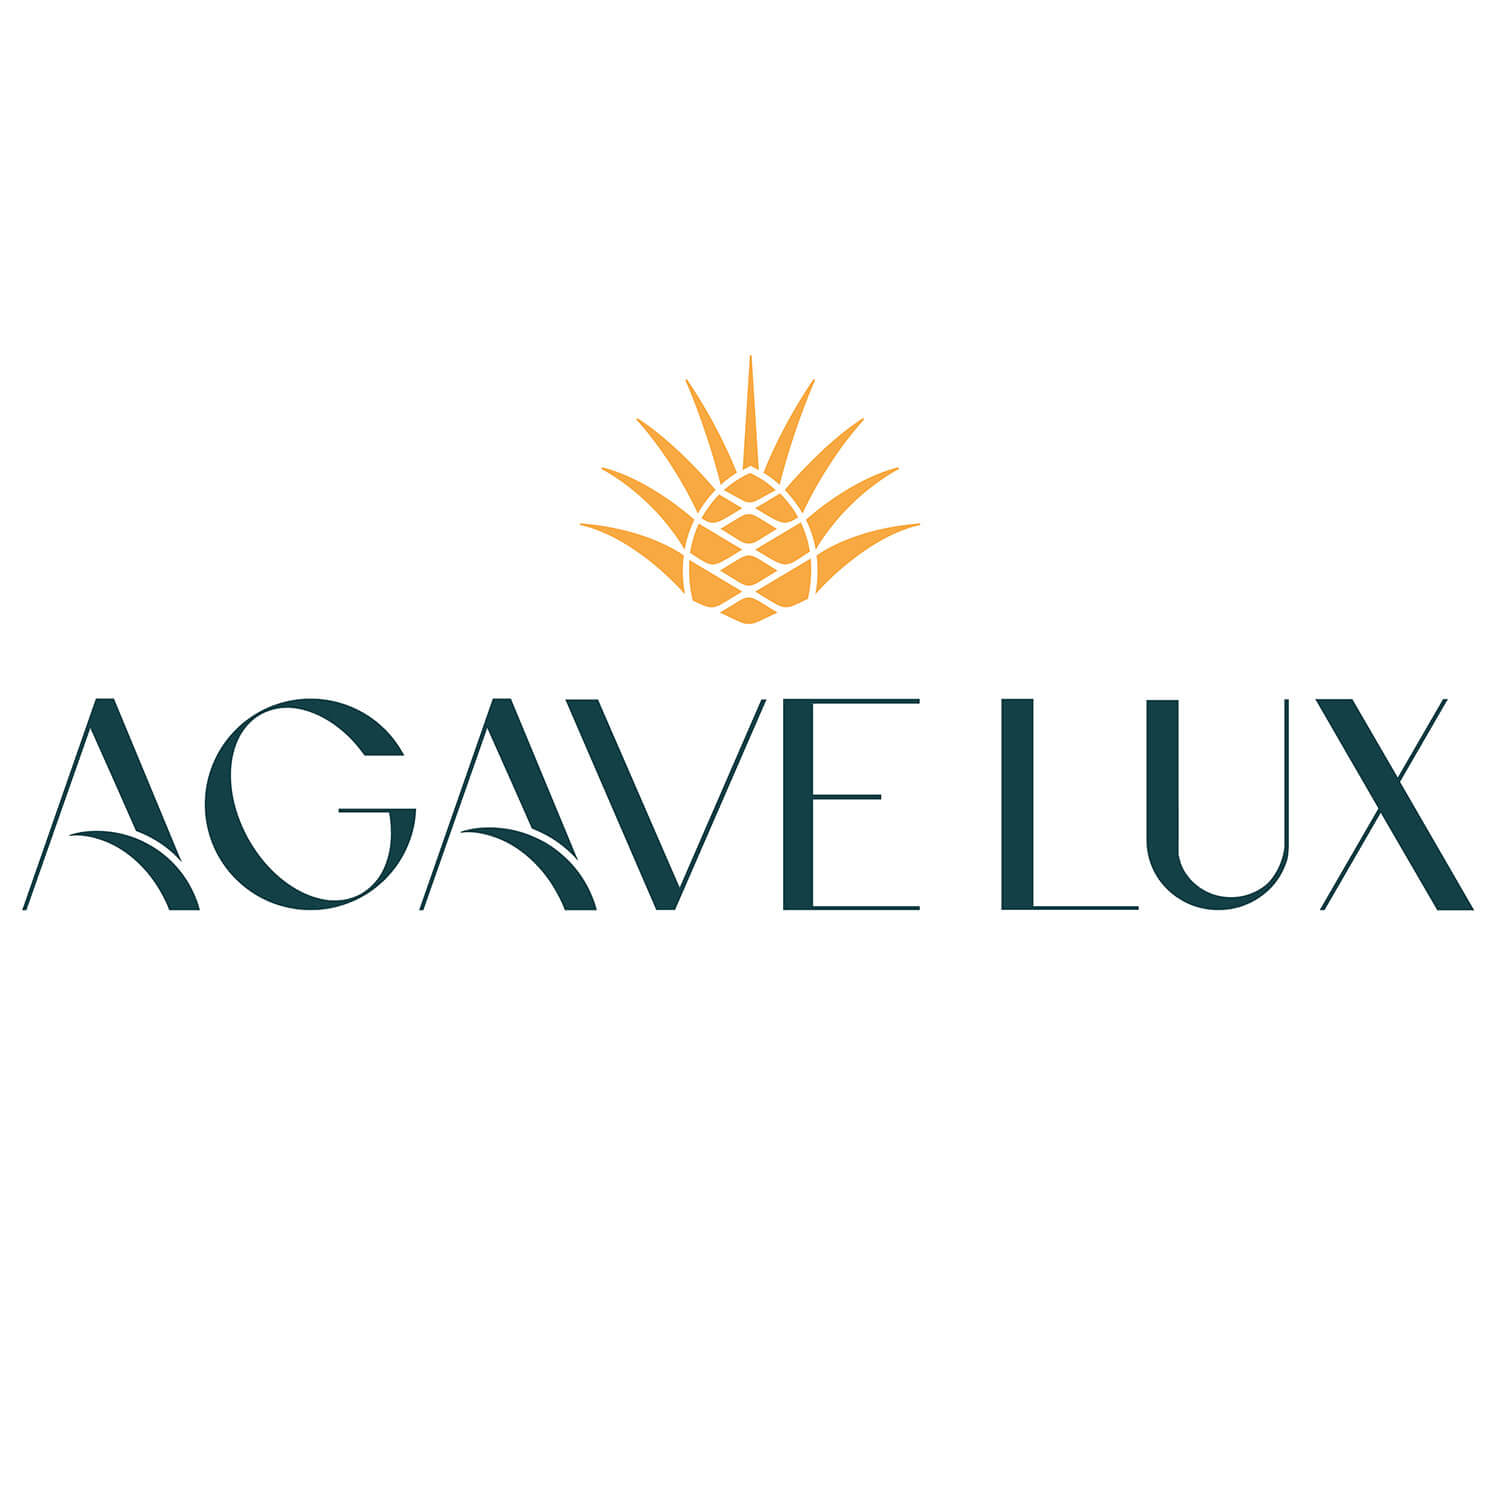 Agave Lux